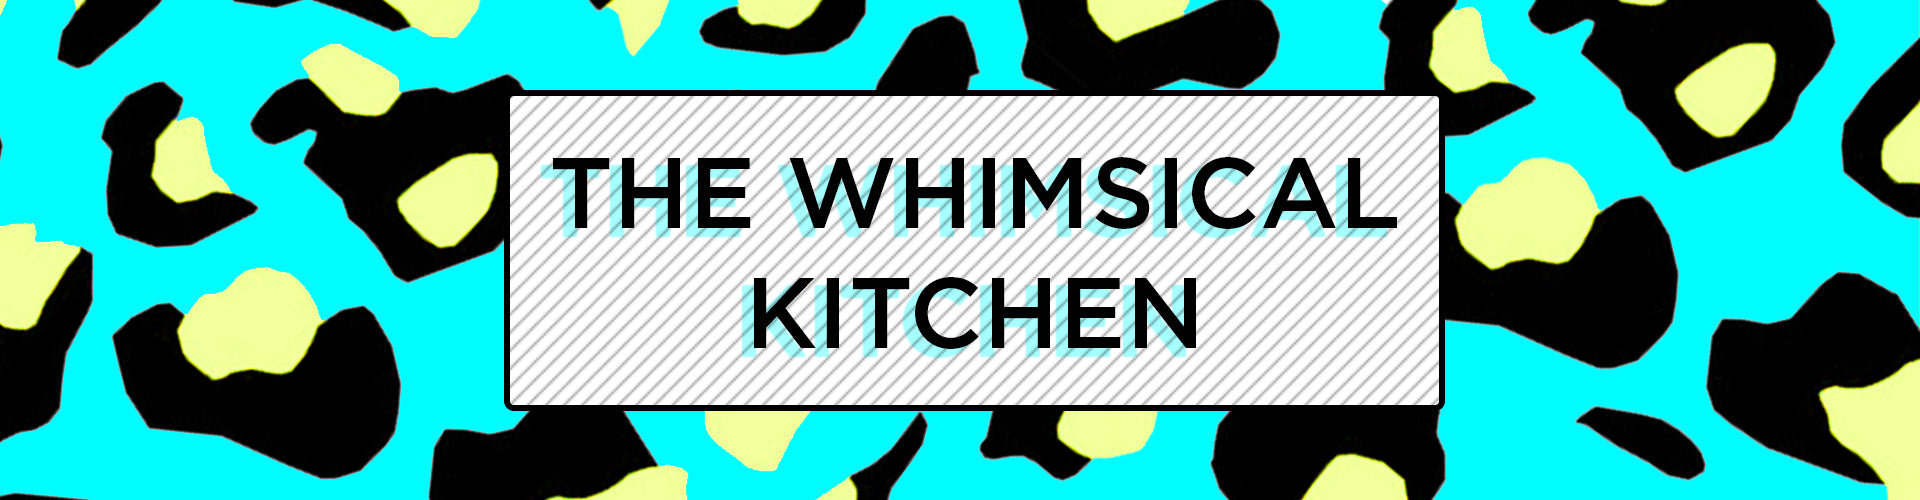 Women We Watch: The Whimsical Kitchen